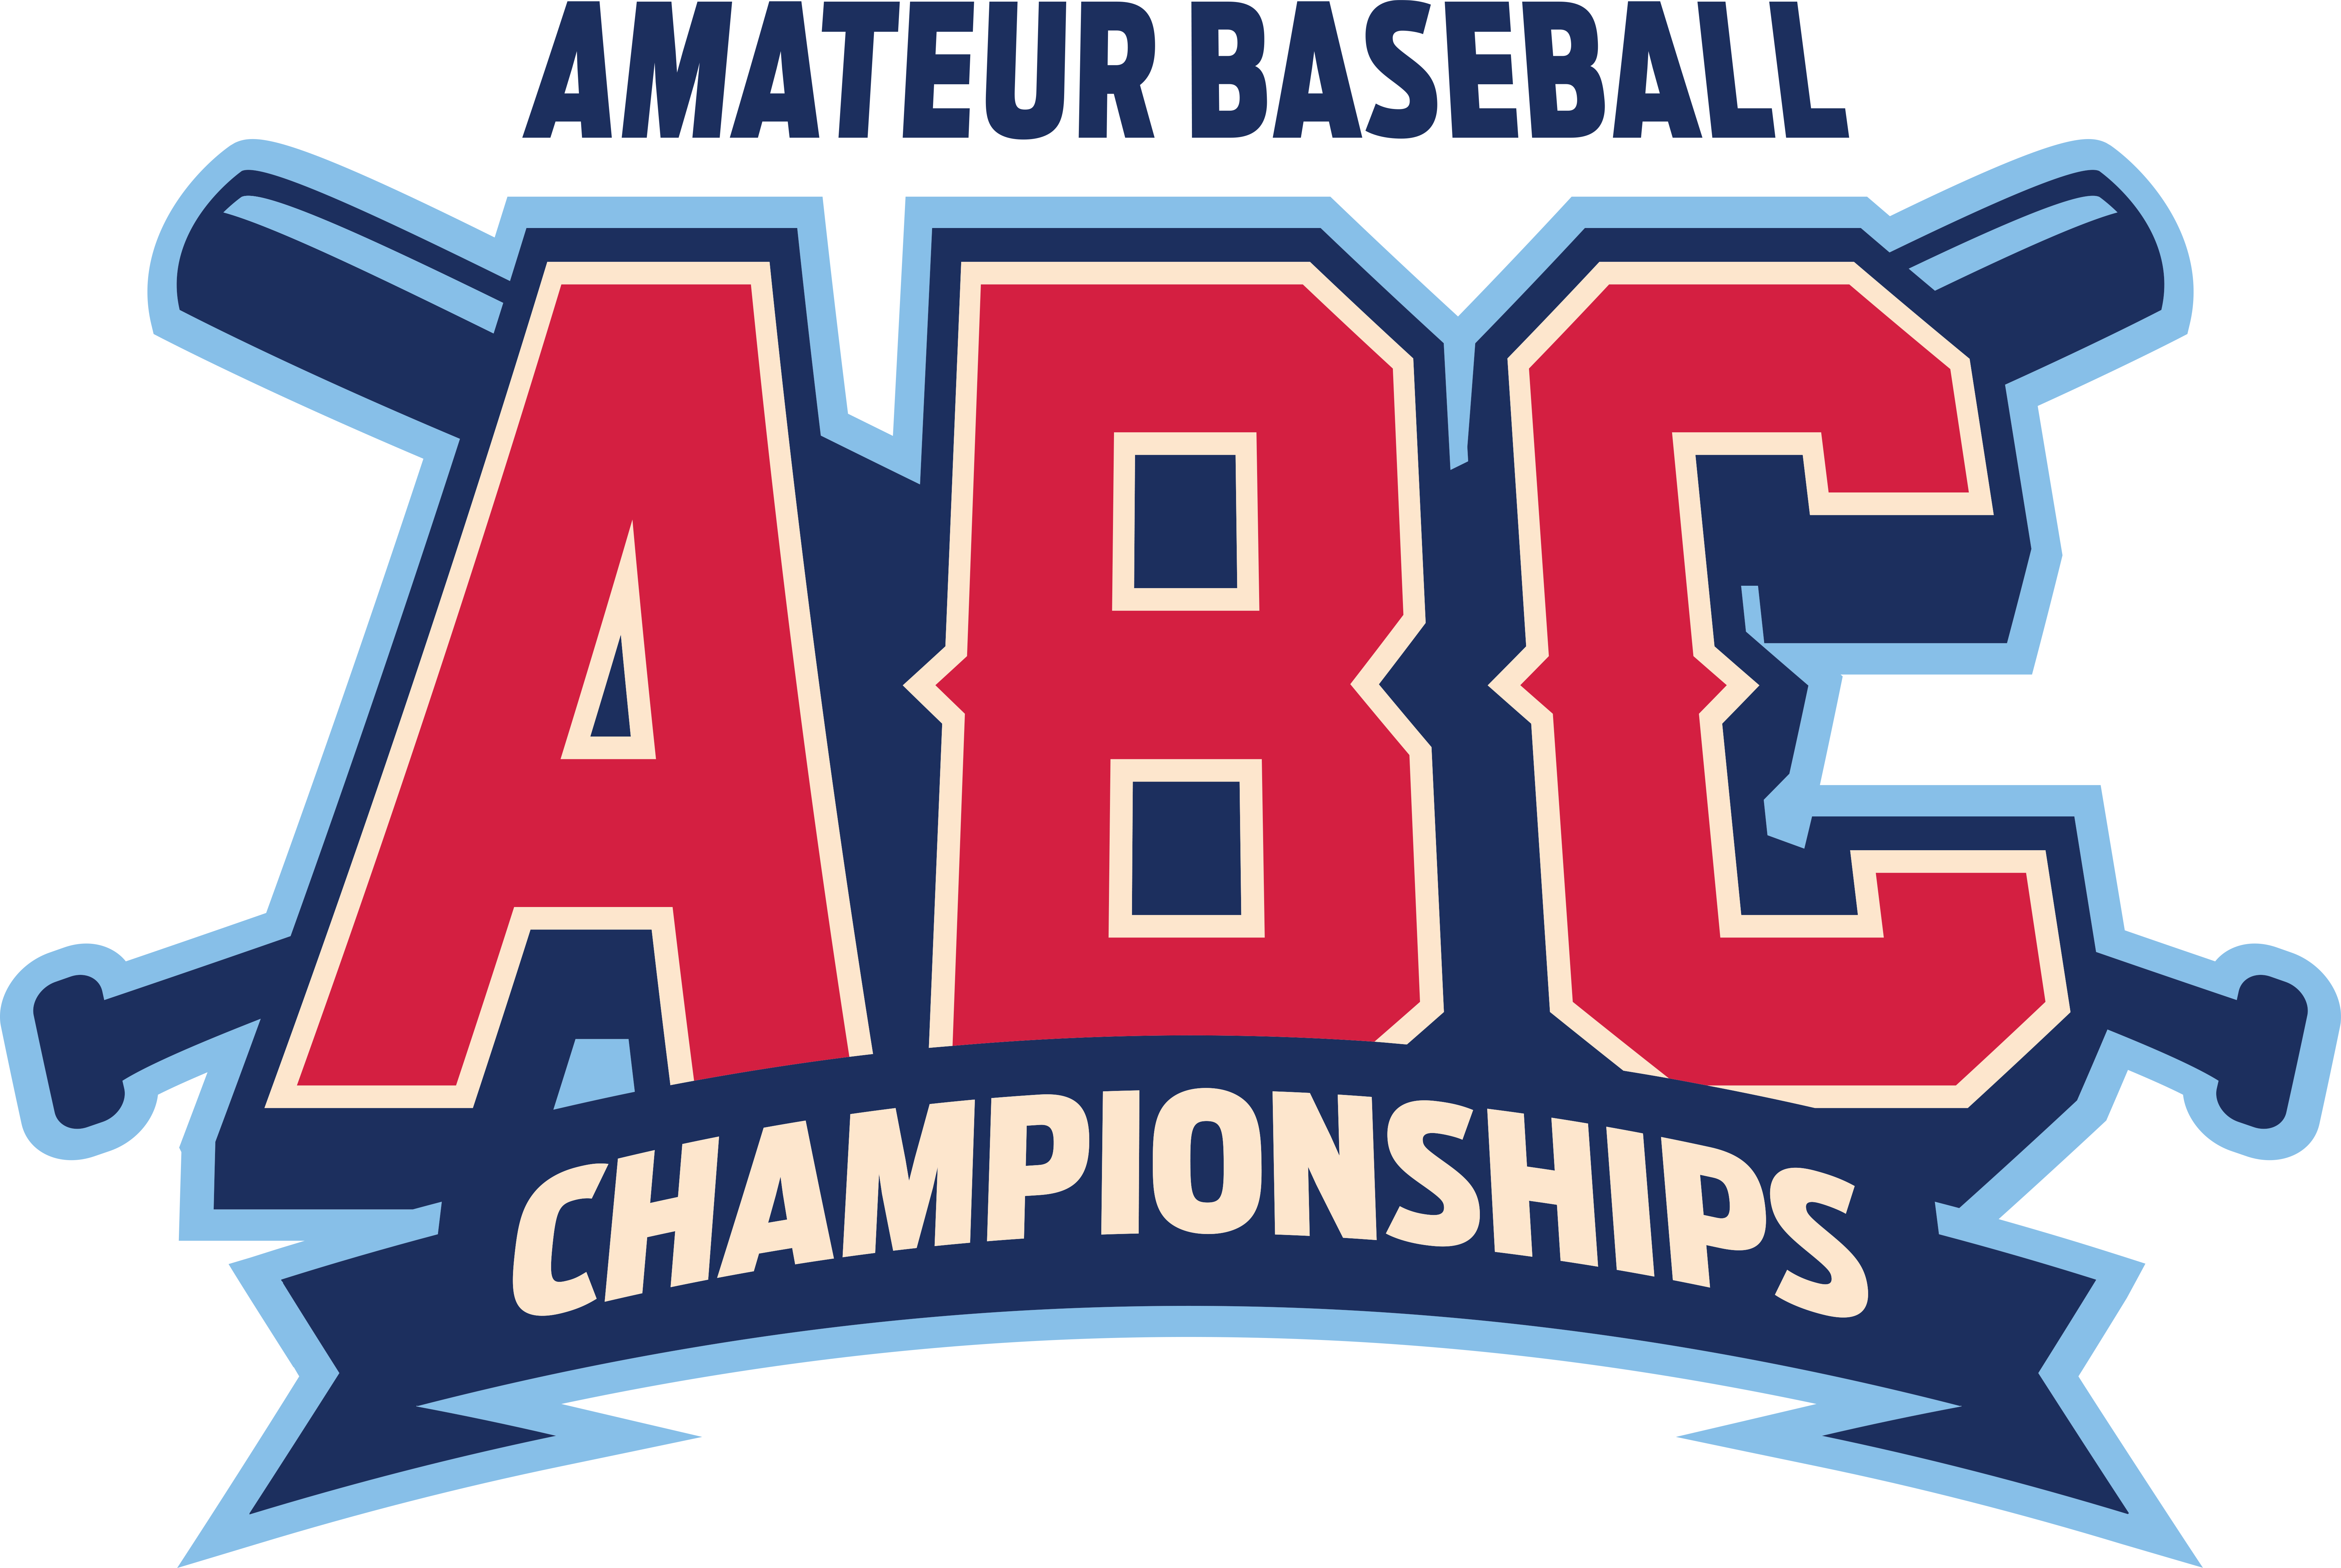 Youth Amateur Baseball Championships (D1 Only) 06/16/2022 06/19/2022